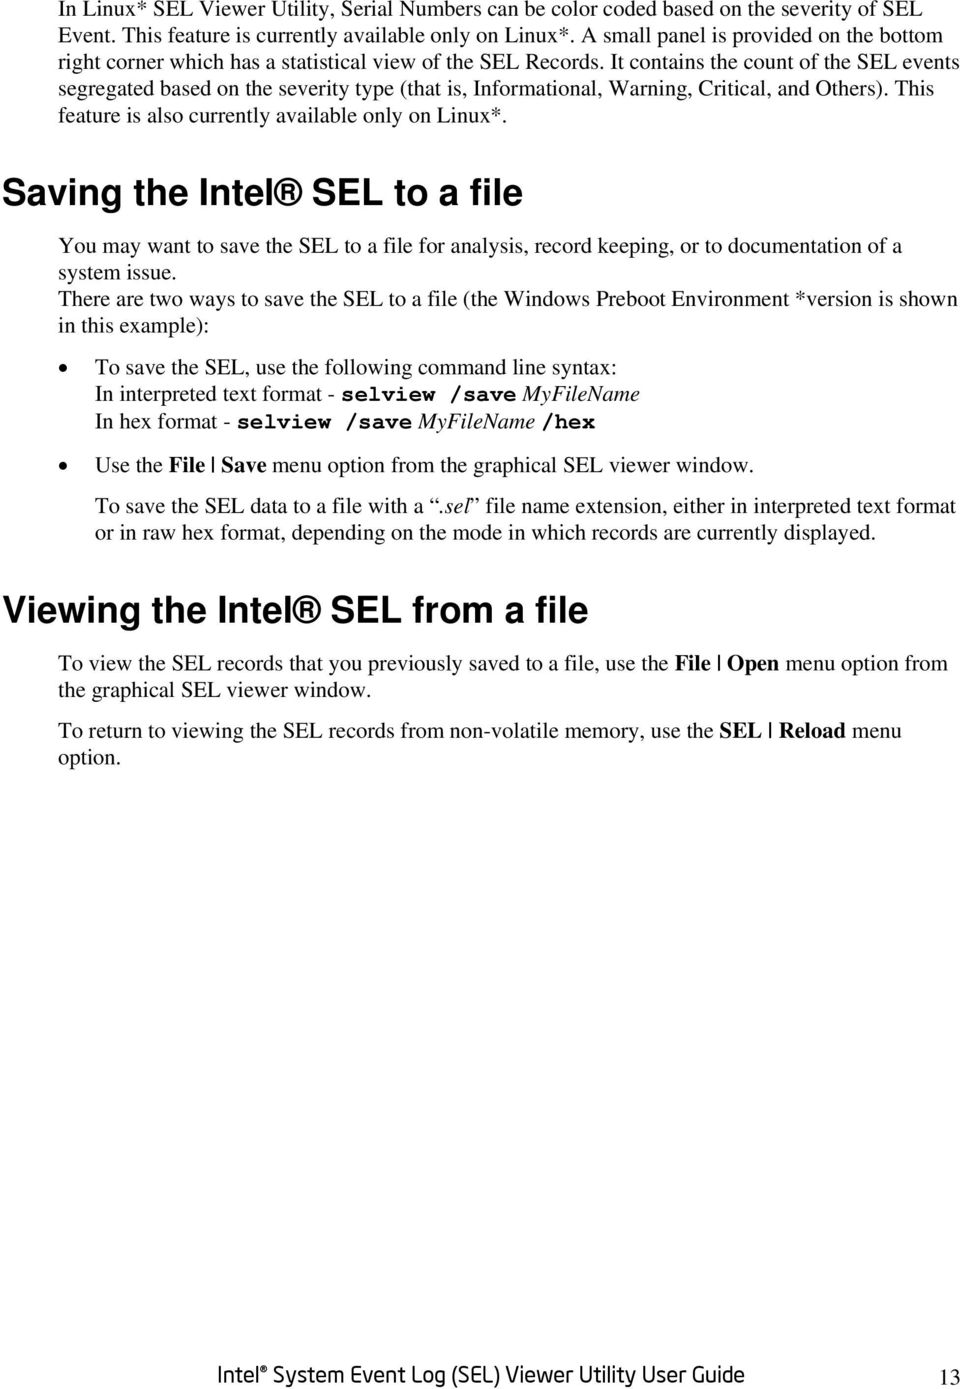 It contains the count of the SEL events segregated based on the severity type (that is, Informational, Warning, Critical, and Others). This feature is also currently available only on Linux*.